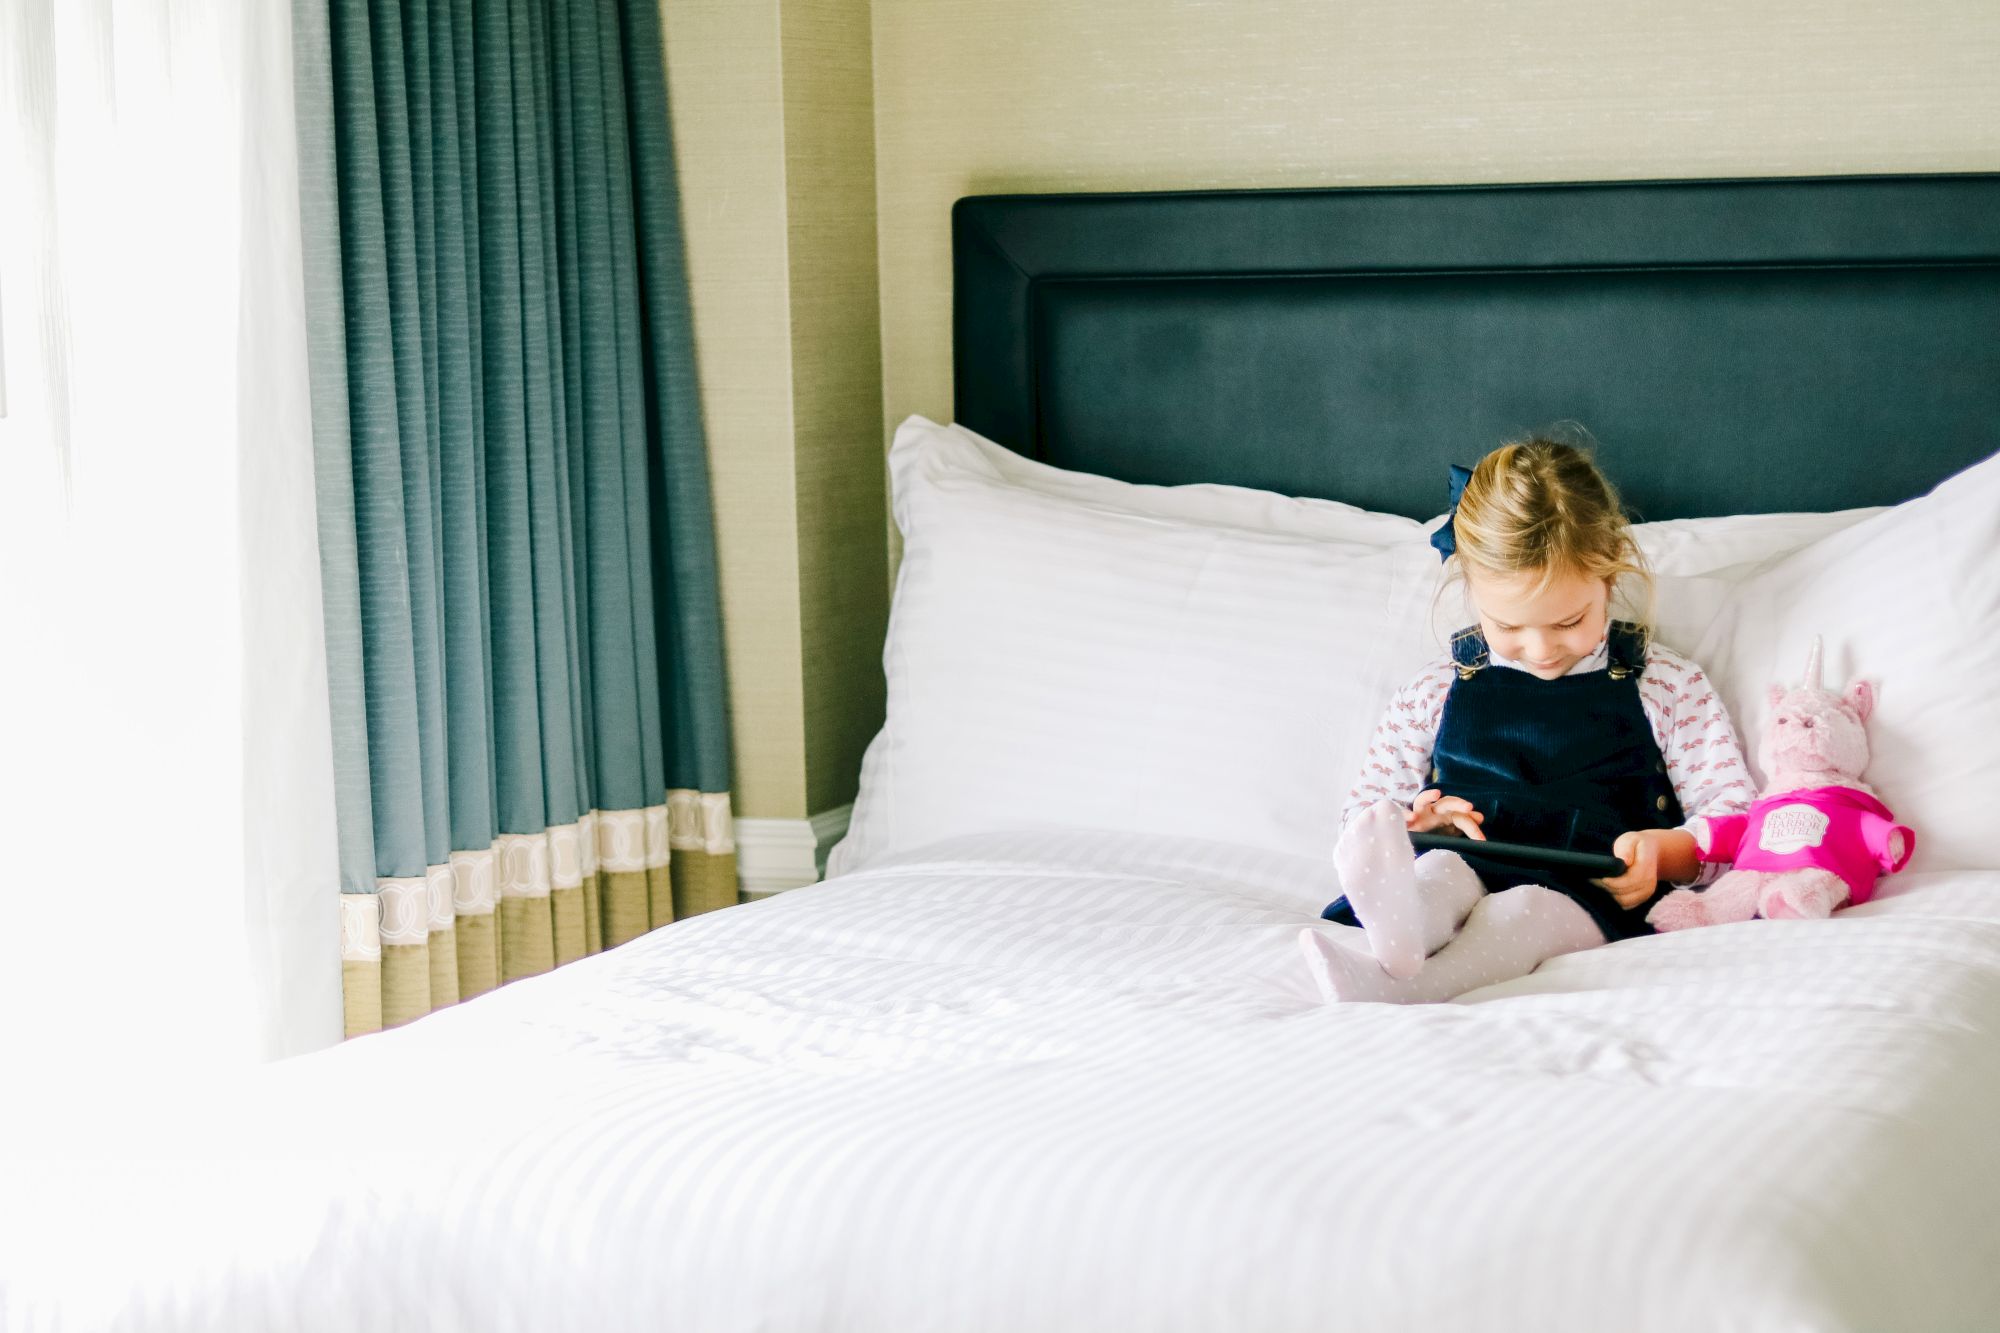 A child is focused on a tablet on a white bed.